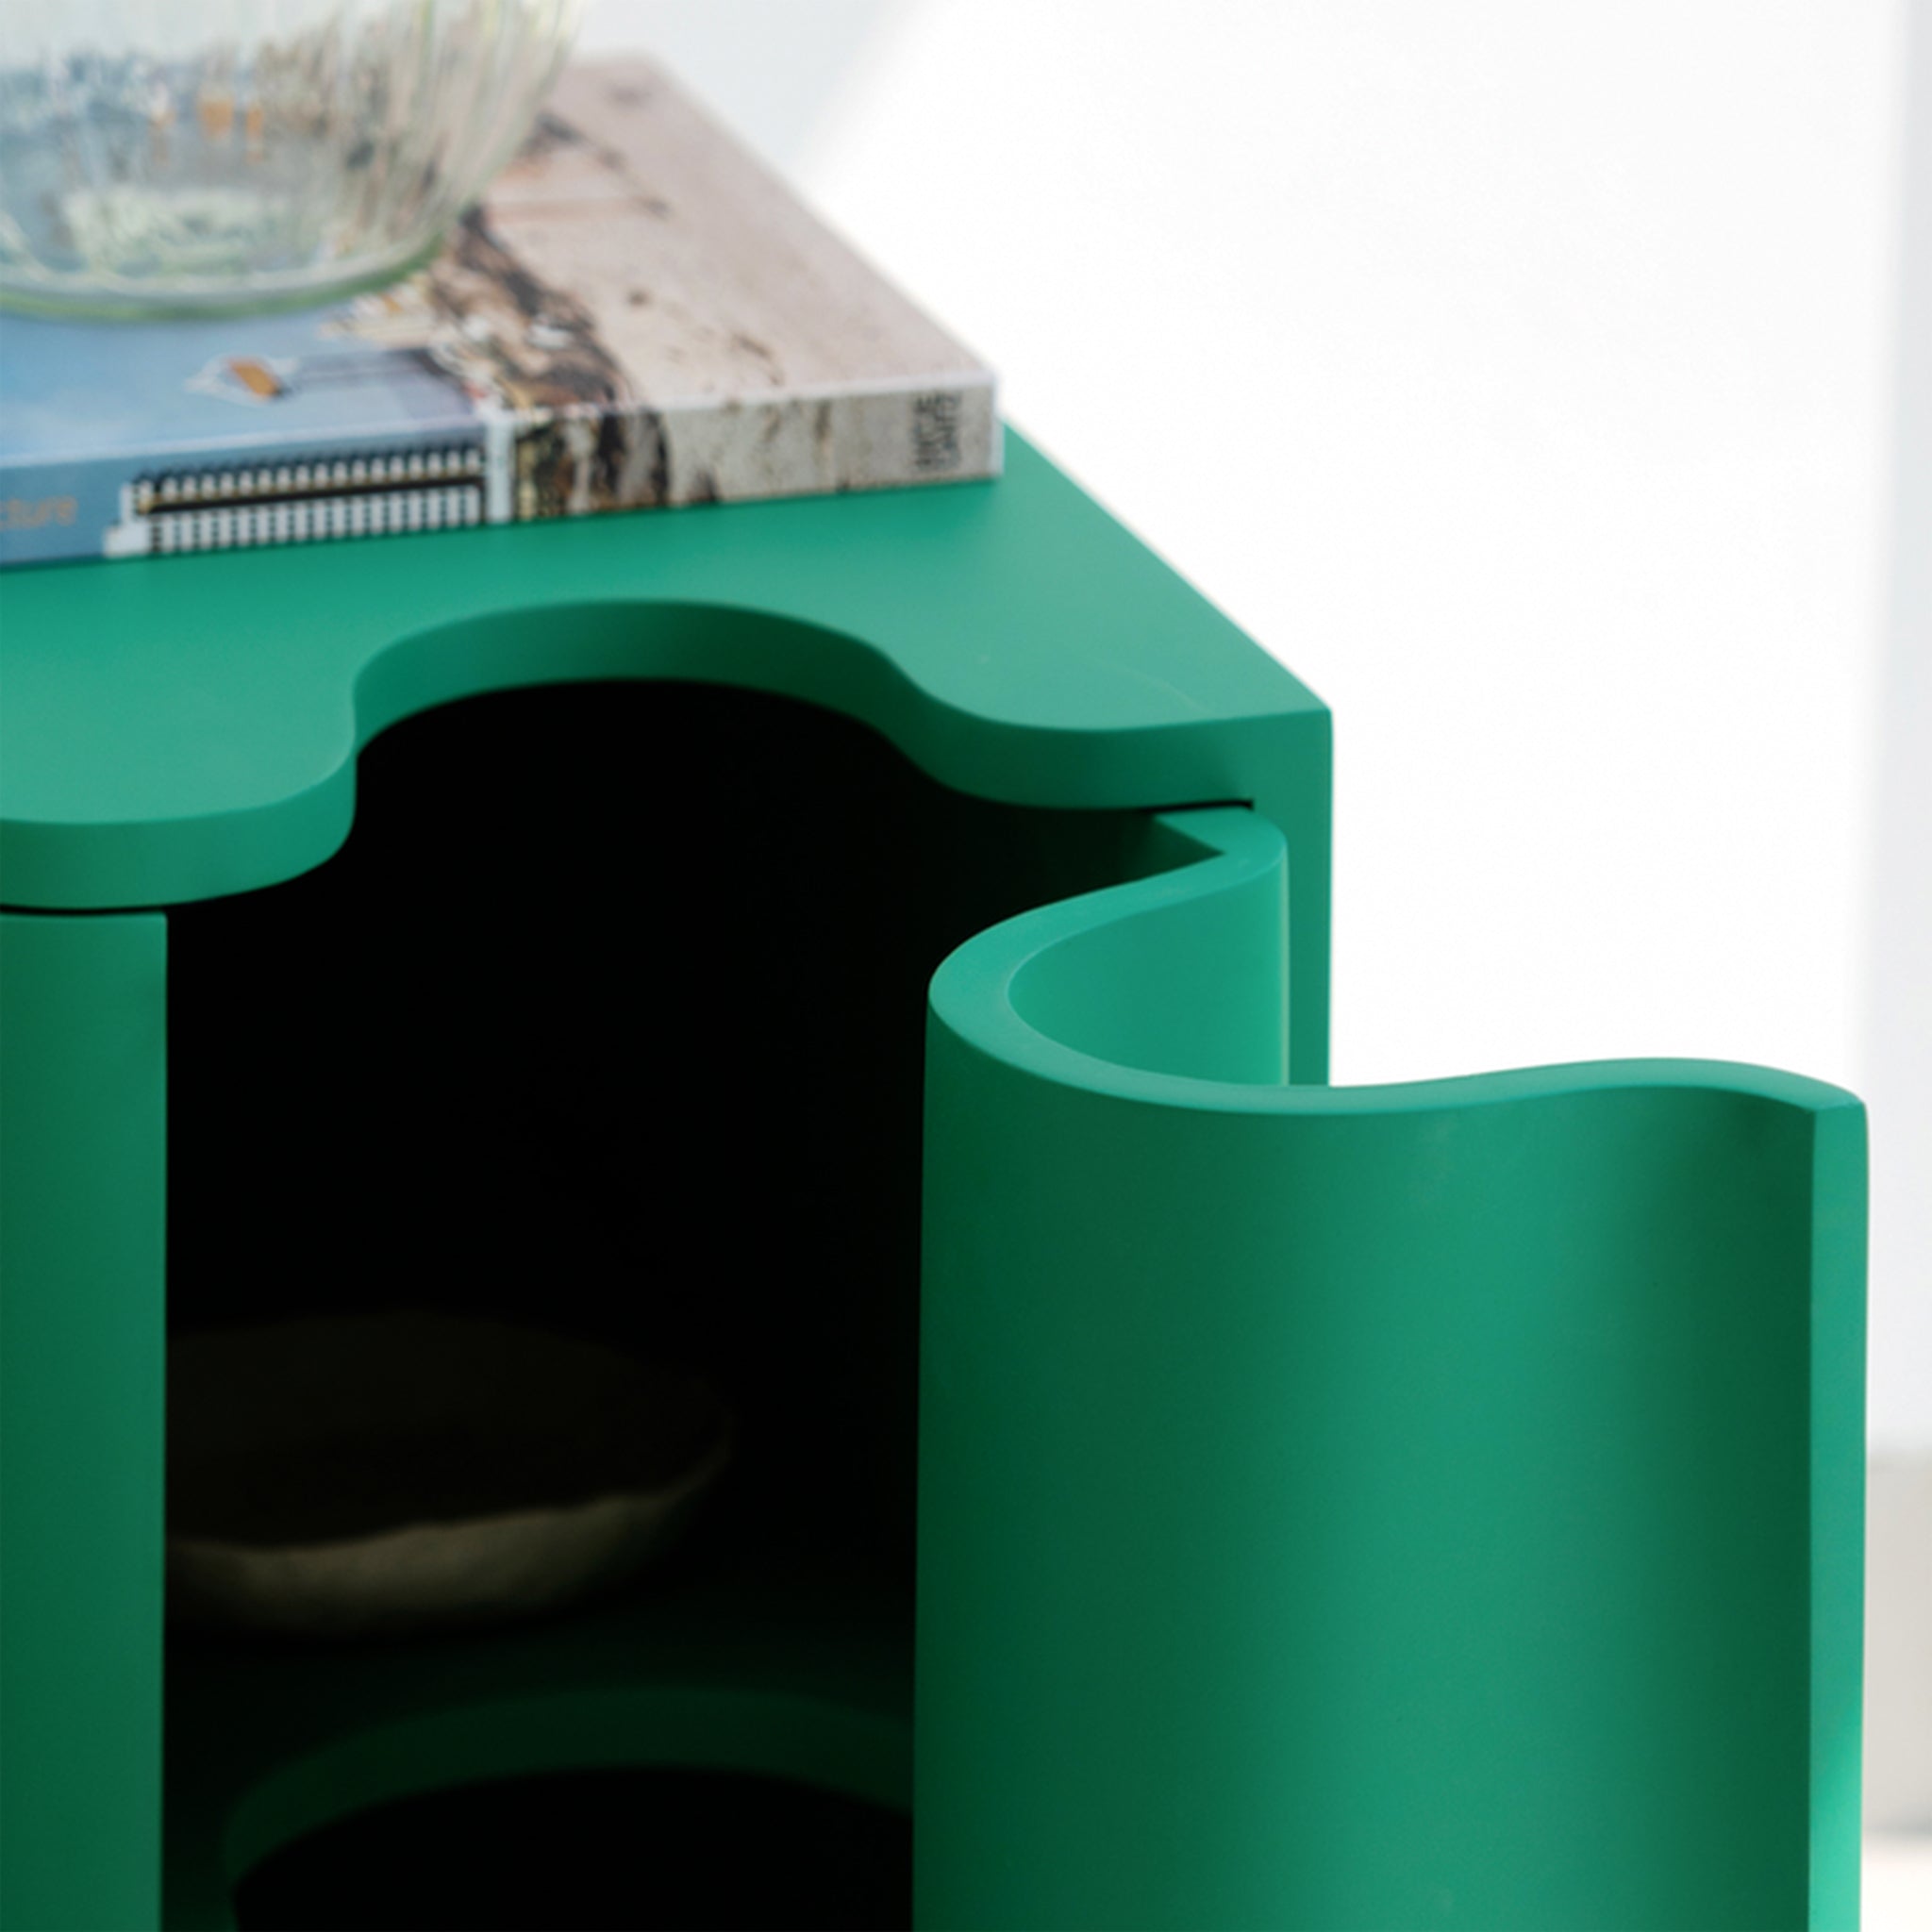 Close-up of a green bedside table with a wavy front design, showing an open compartment with a clear glass table lamp and books on top, set against a white background.